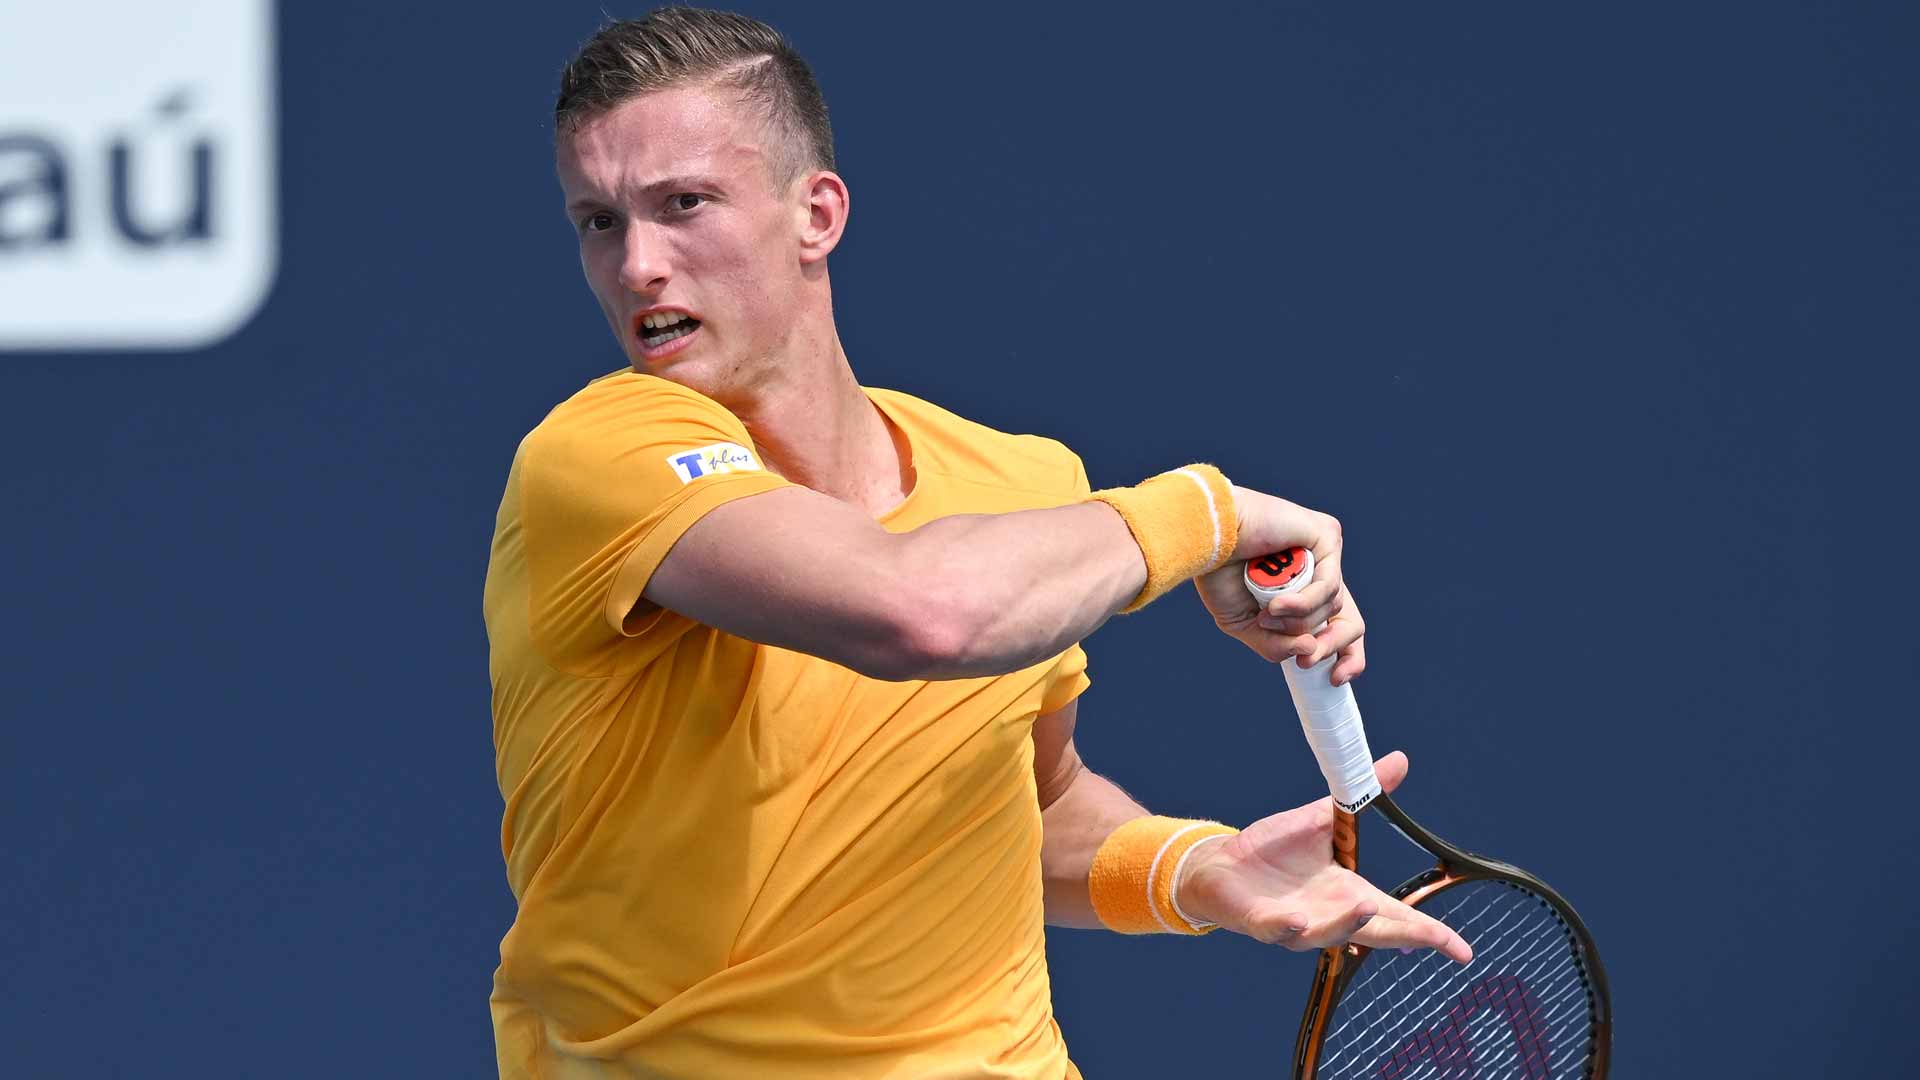 Jiri Lehecka is the No. 1 player from the Czech Republic in the Pepperstone ATP Rankings.